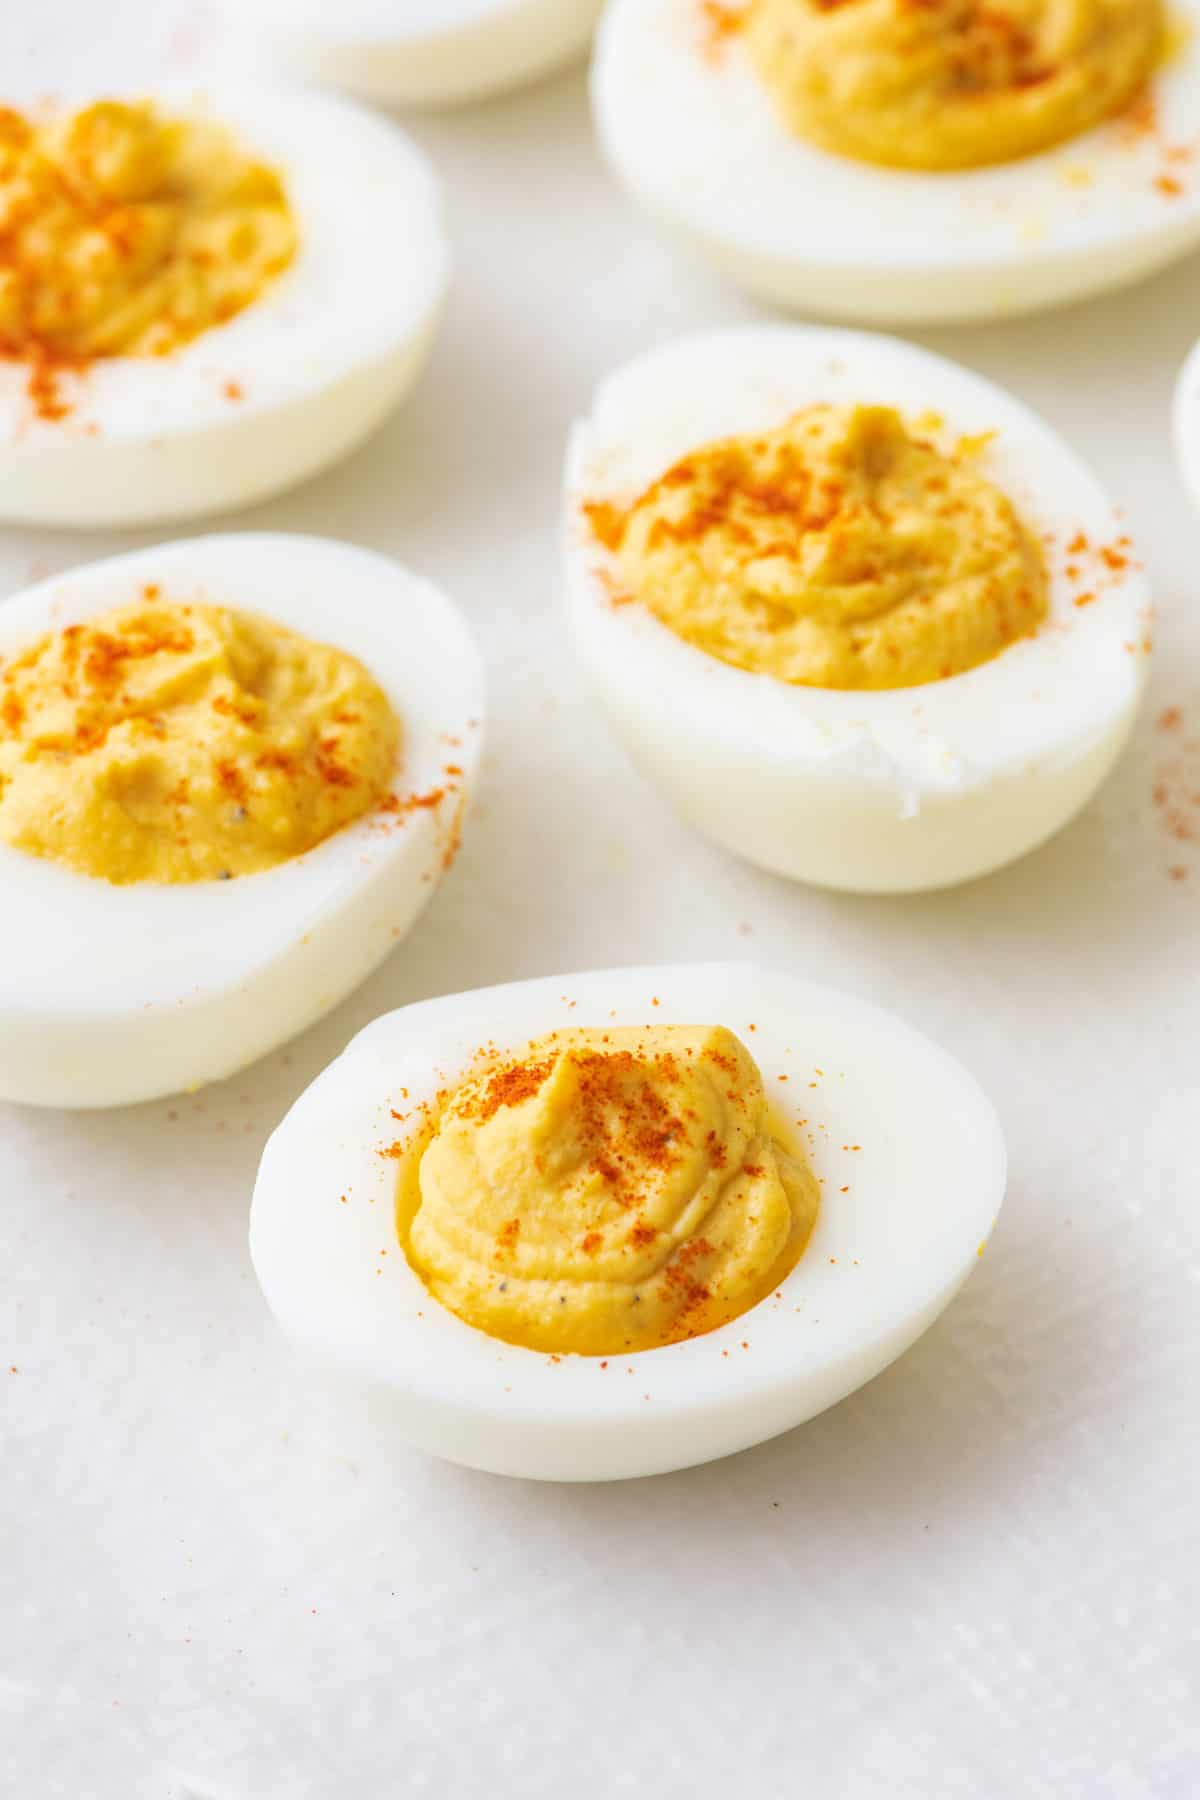 Close up side view of devilled eggs with paprika sprinkled on top.